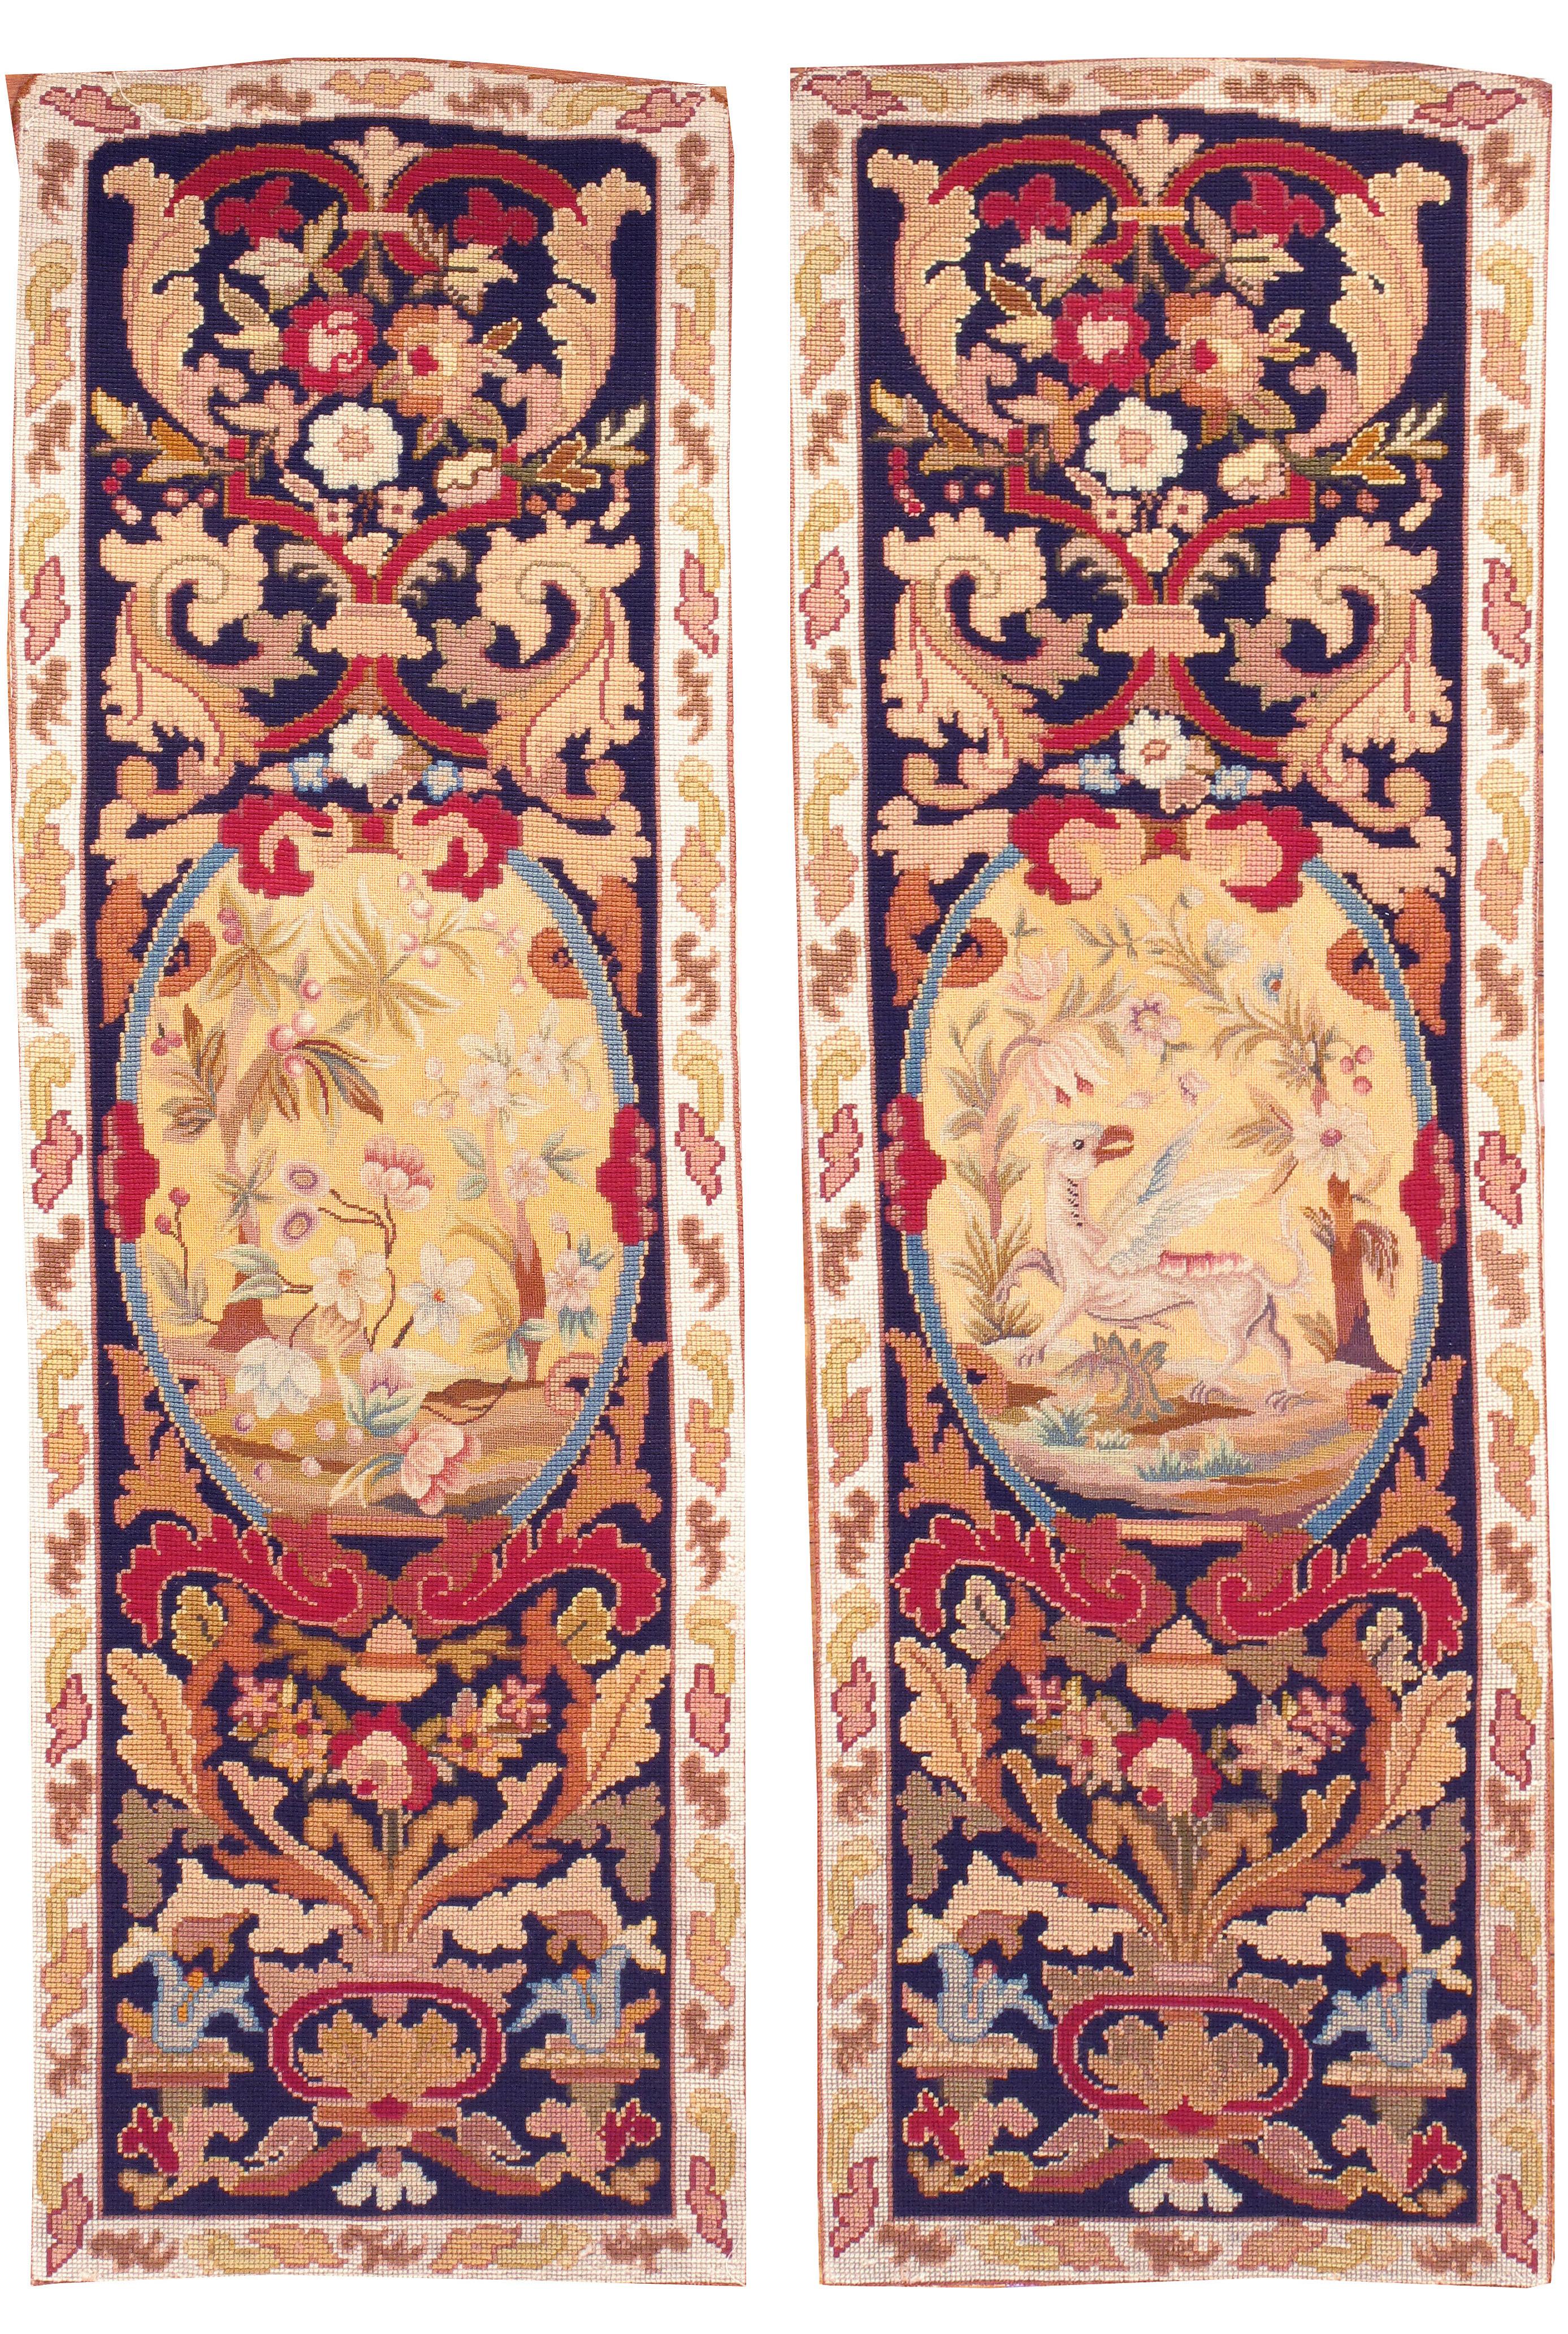 A set of five French needlepoint panels, circa 1880. Each panel has a different animal or floral them. Size: 1'3 x 3'10.